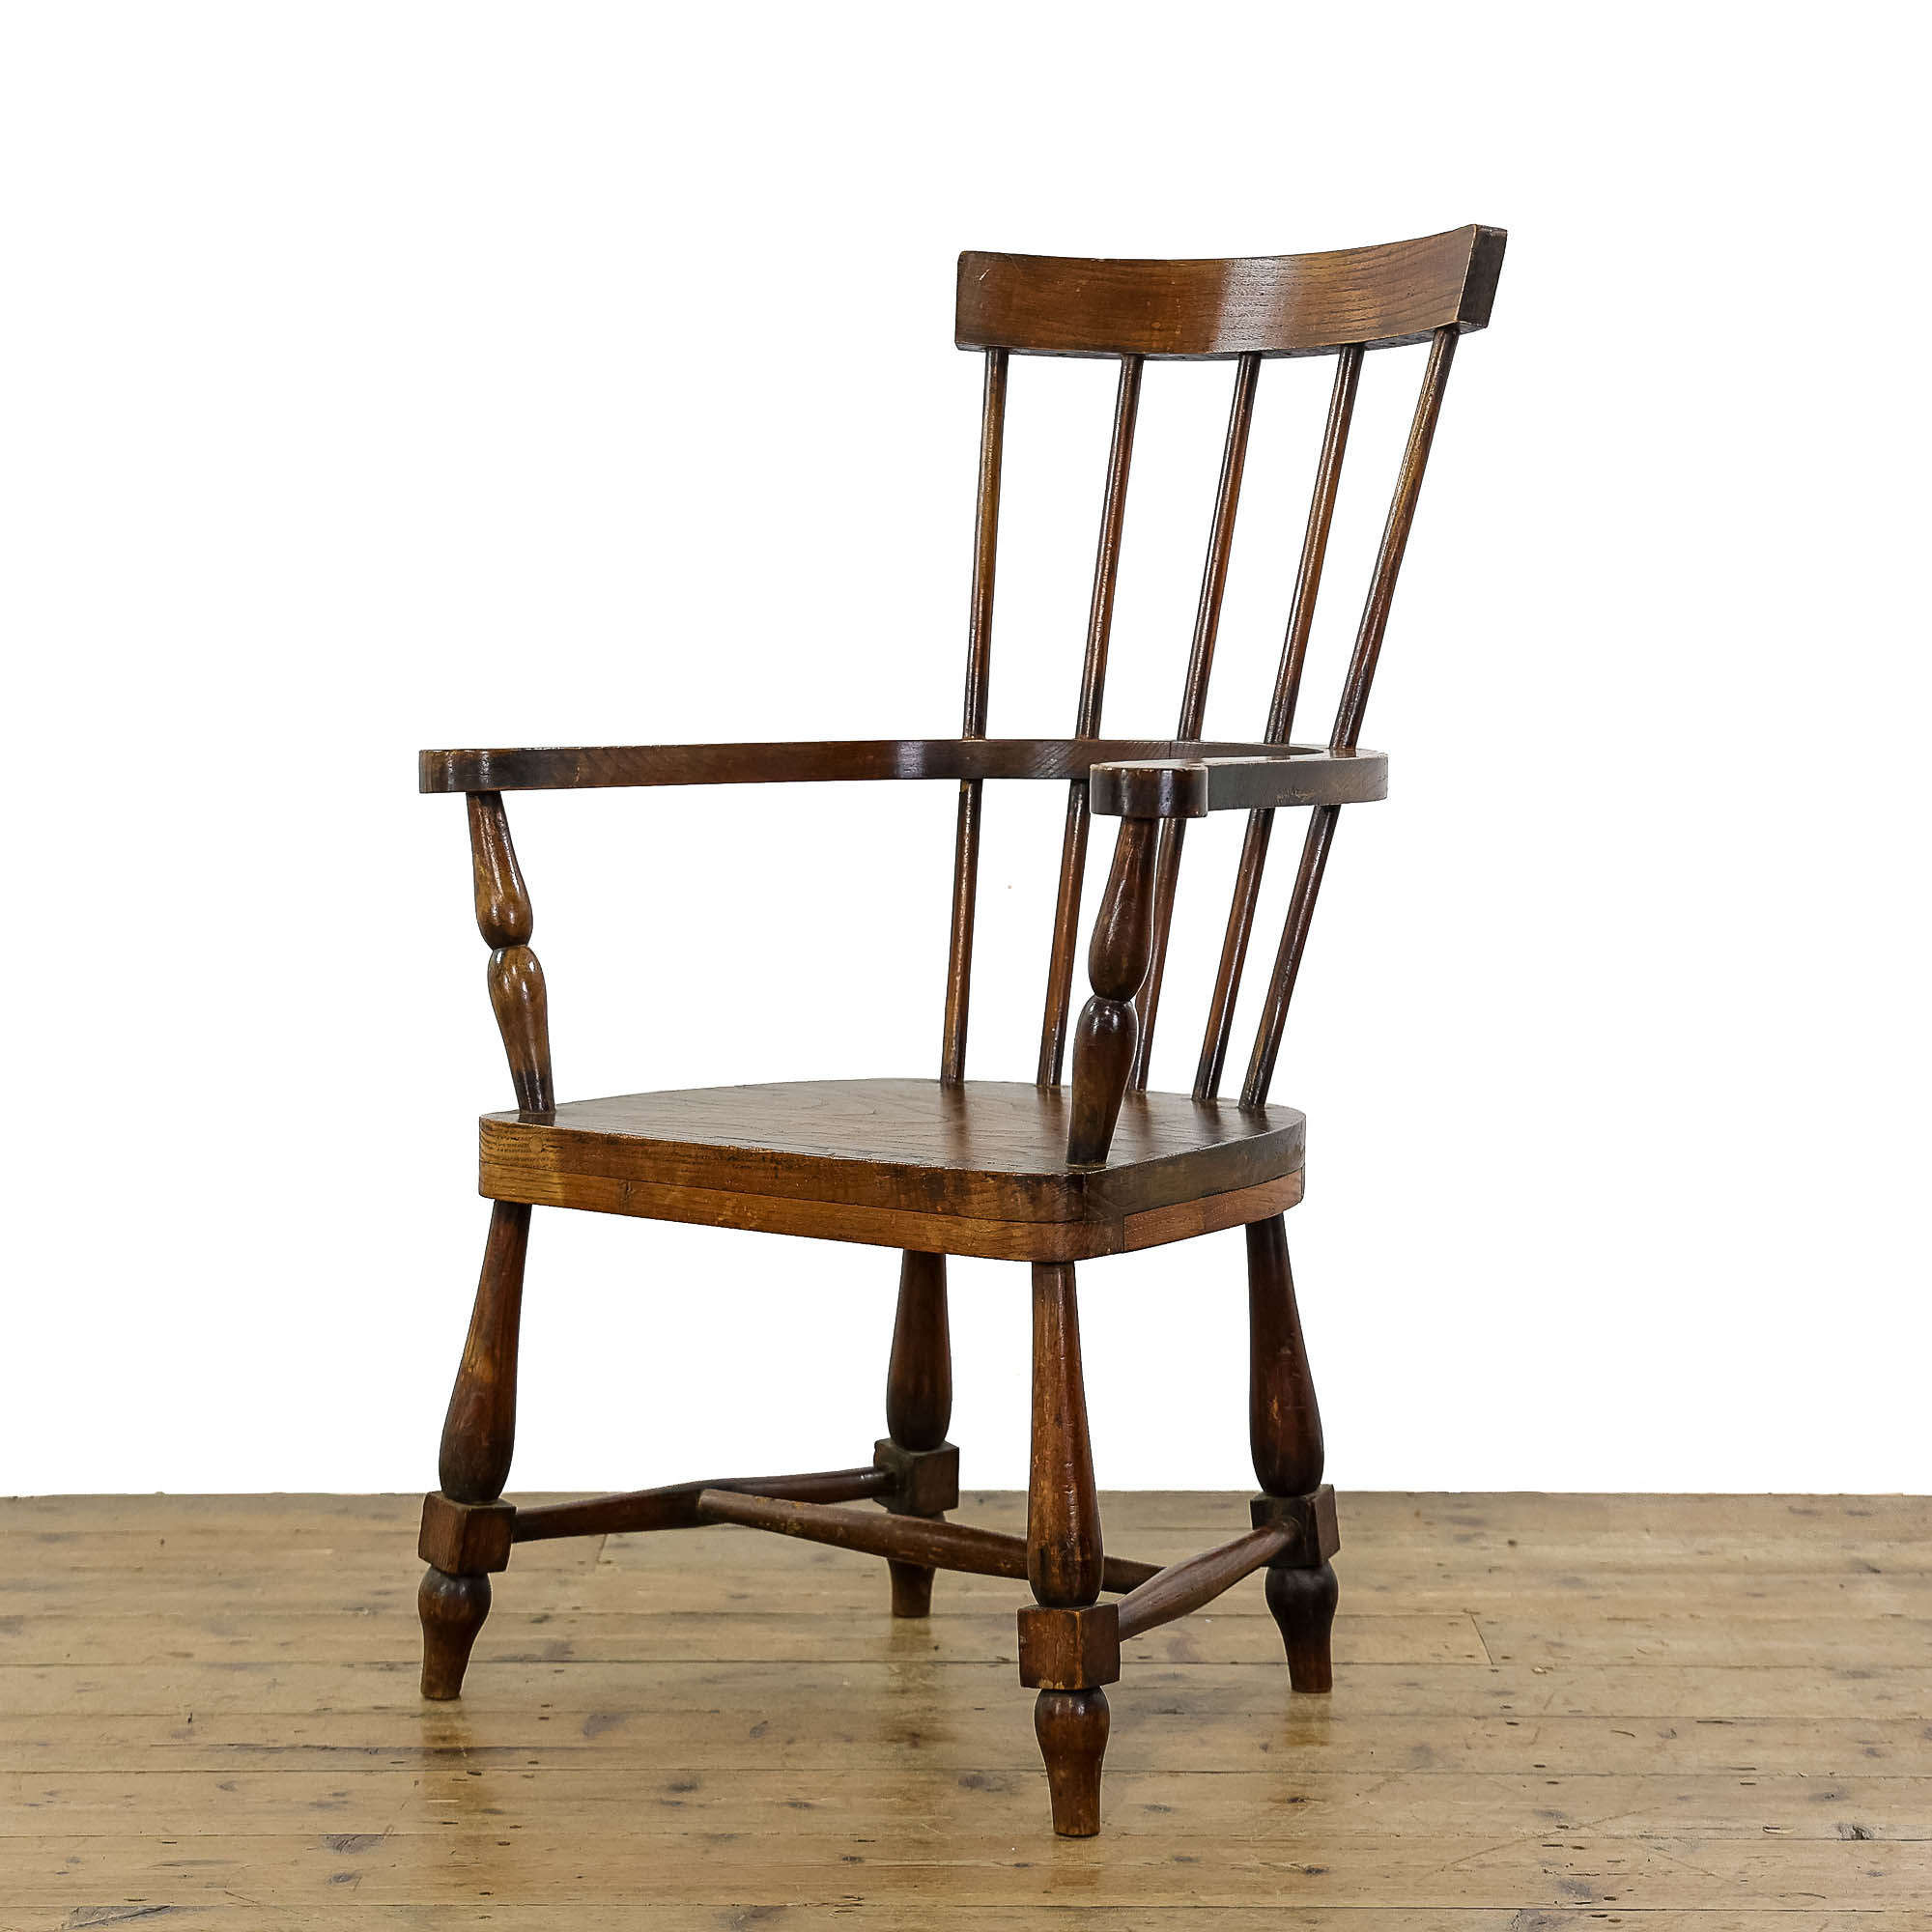 Antique Arts And Crafts Style Stick Chair